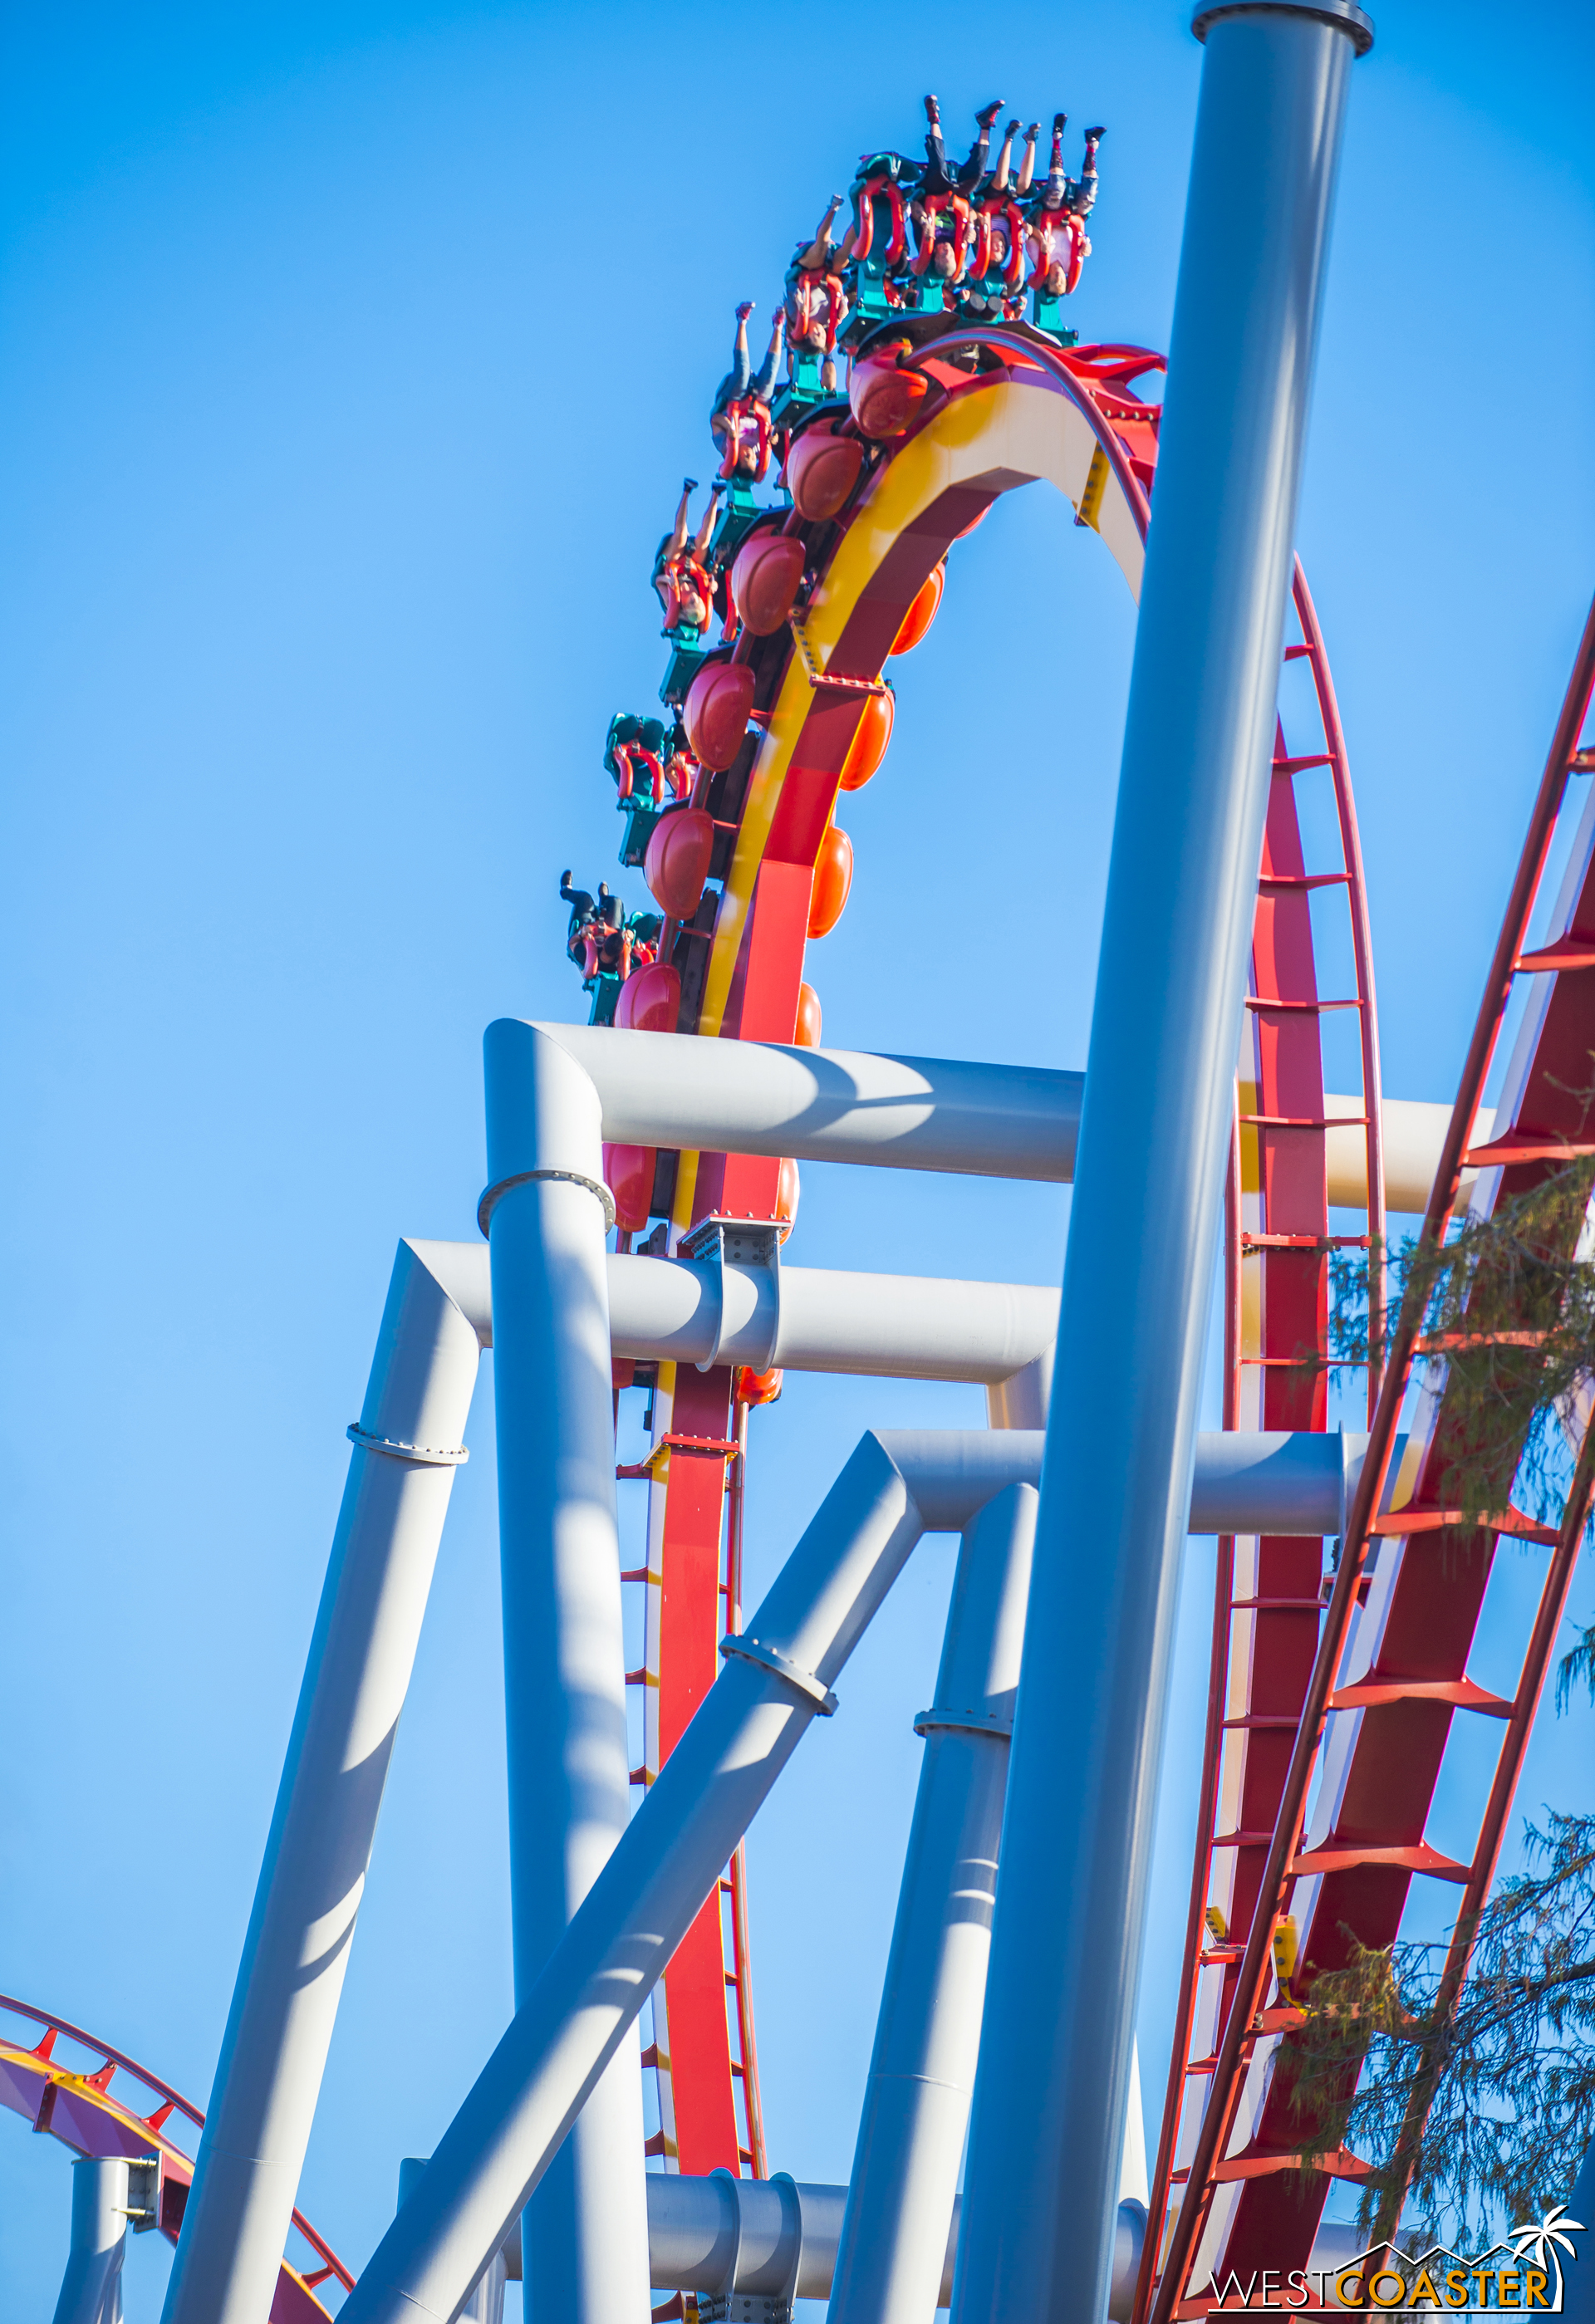  Silver Bullet continues to thrill riders of all ages. 